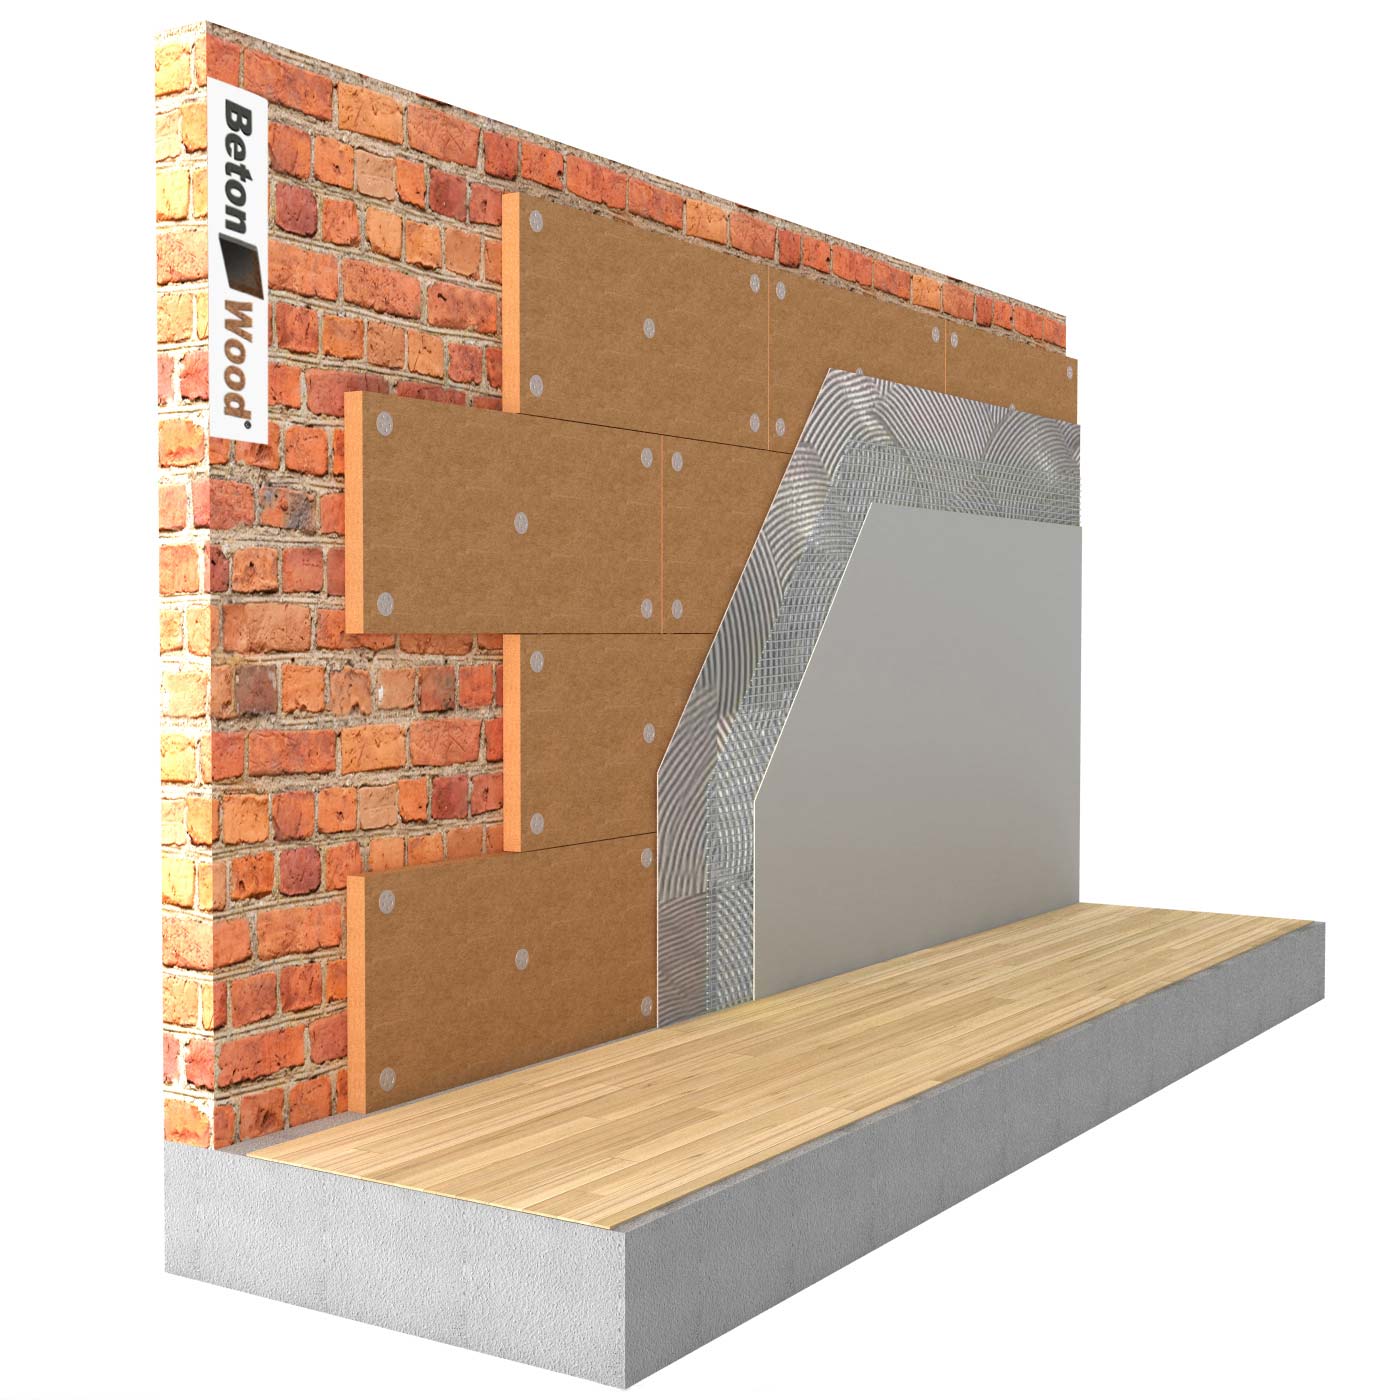 Internal thermal insulation system in Protect dry Fiber wood